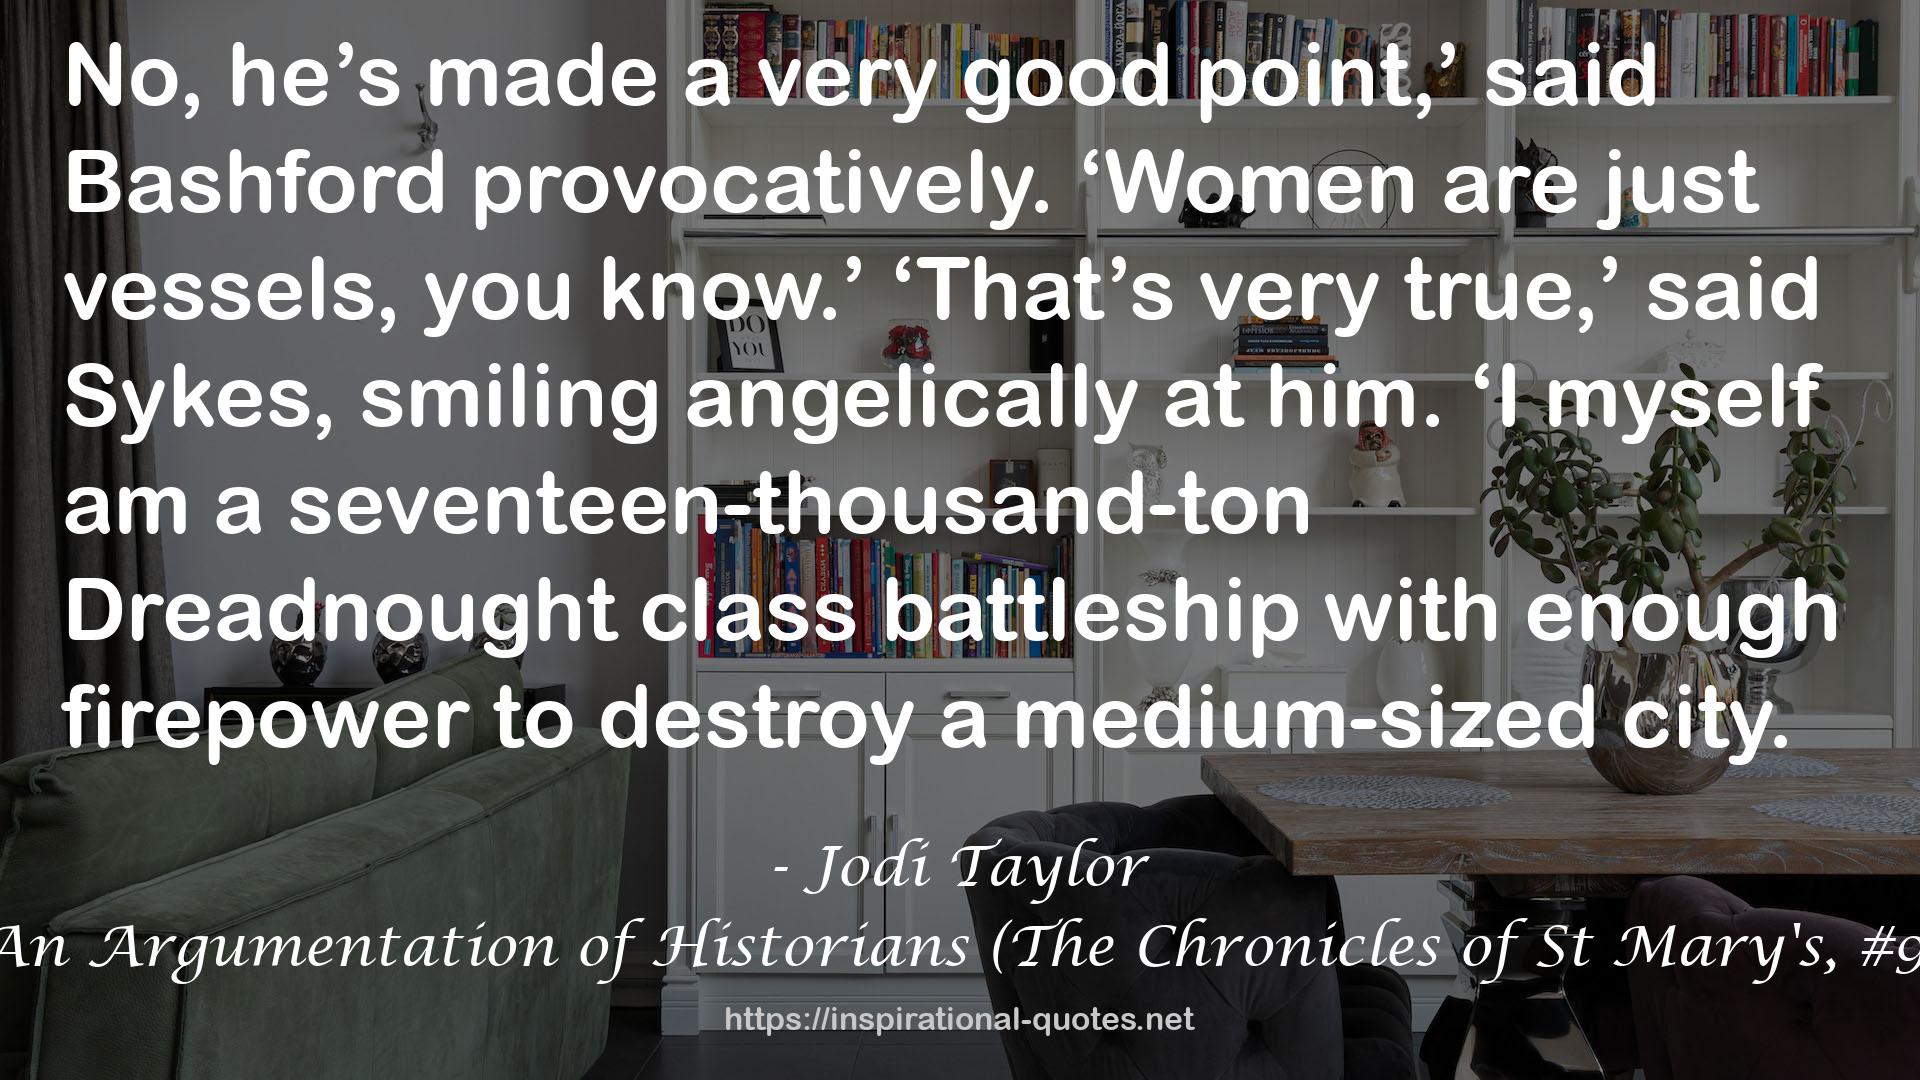 An Argumentation of Historians (The Chronicles of St Mary's, #9) QUOTES